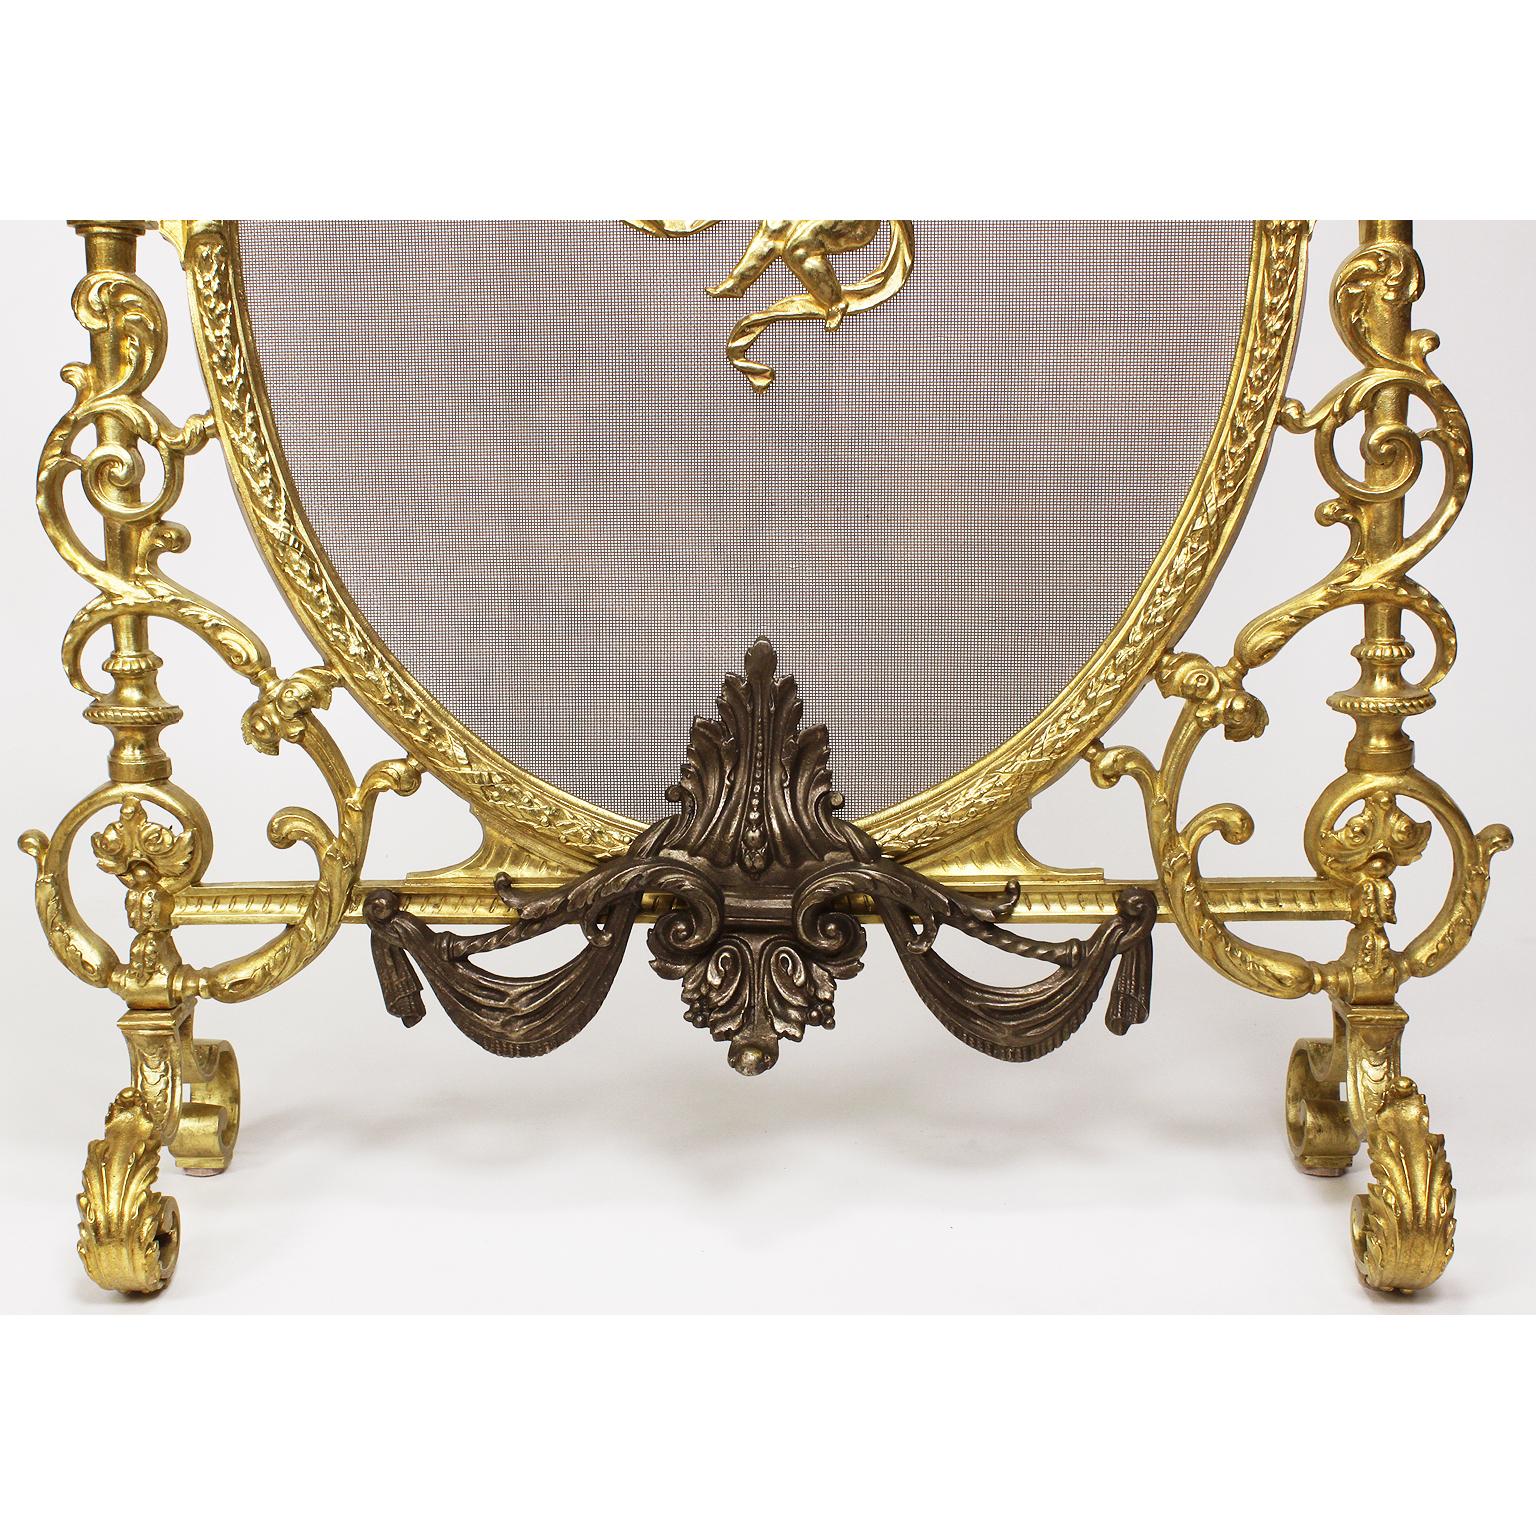 French 19th-20th Century Louis XV Style Gilt-Bronze Fireplace Screen In Good Condition For Sale In Los Angeles, CA